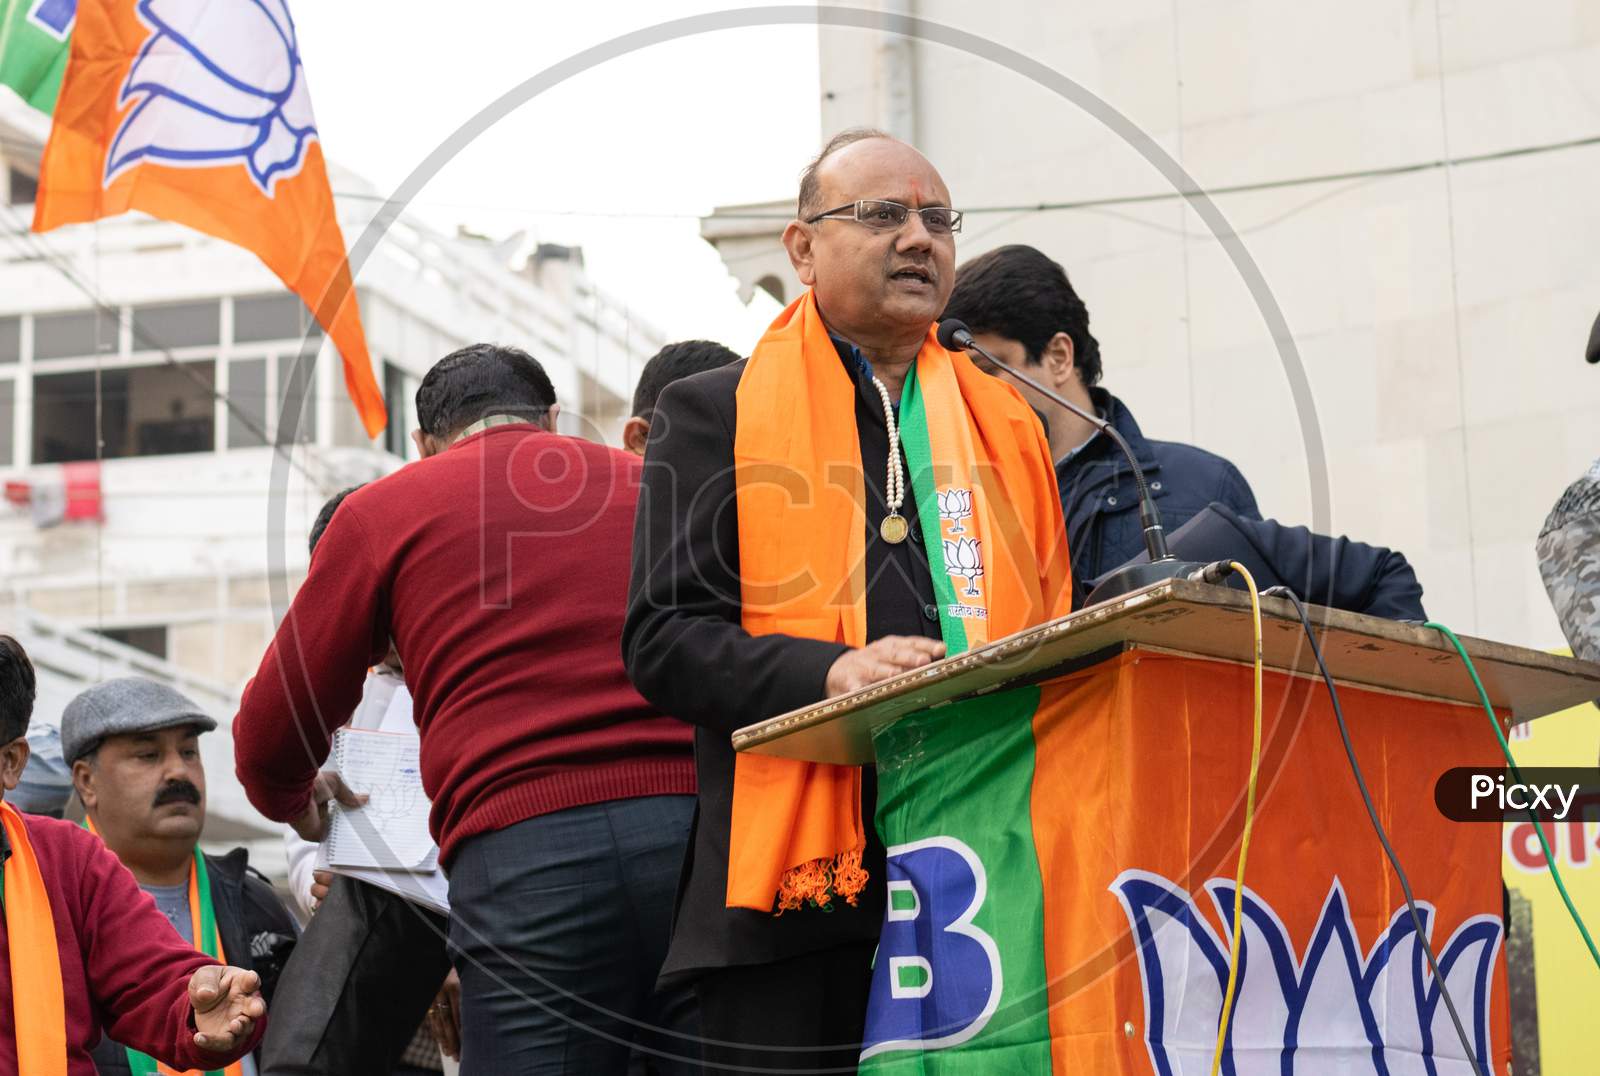 Dr. Anil Goyal, Candidate of BJP from Krishan nagar Assembly, campaigning for Delhi Assembly election 2020